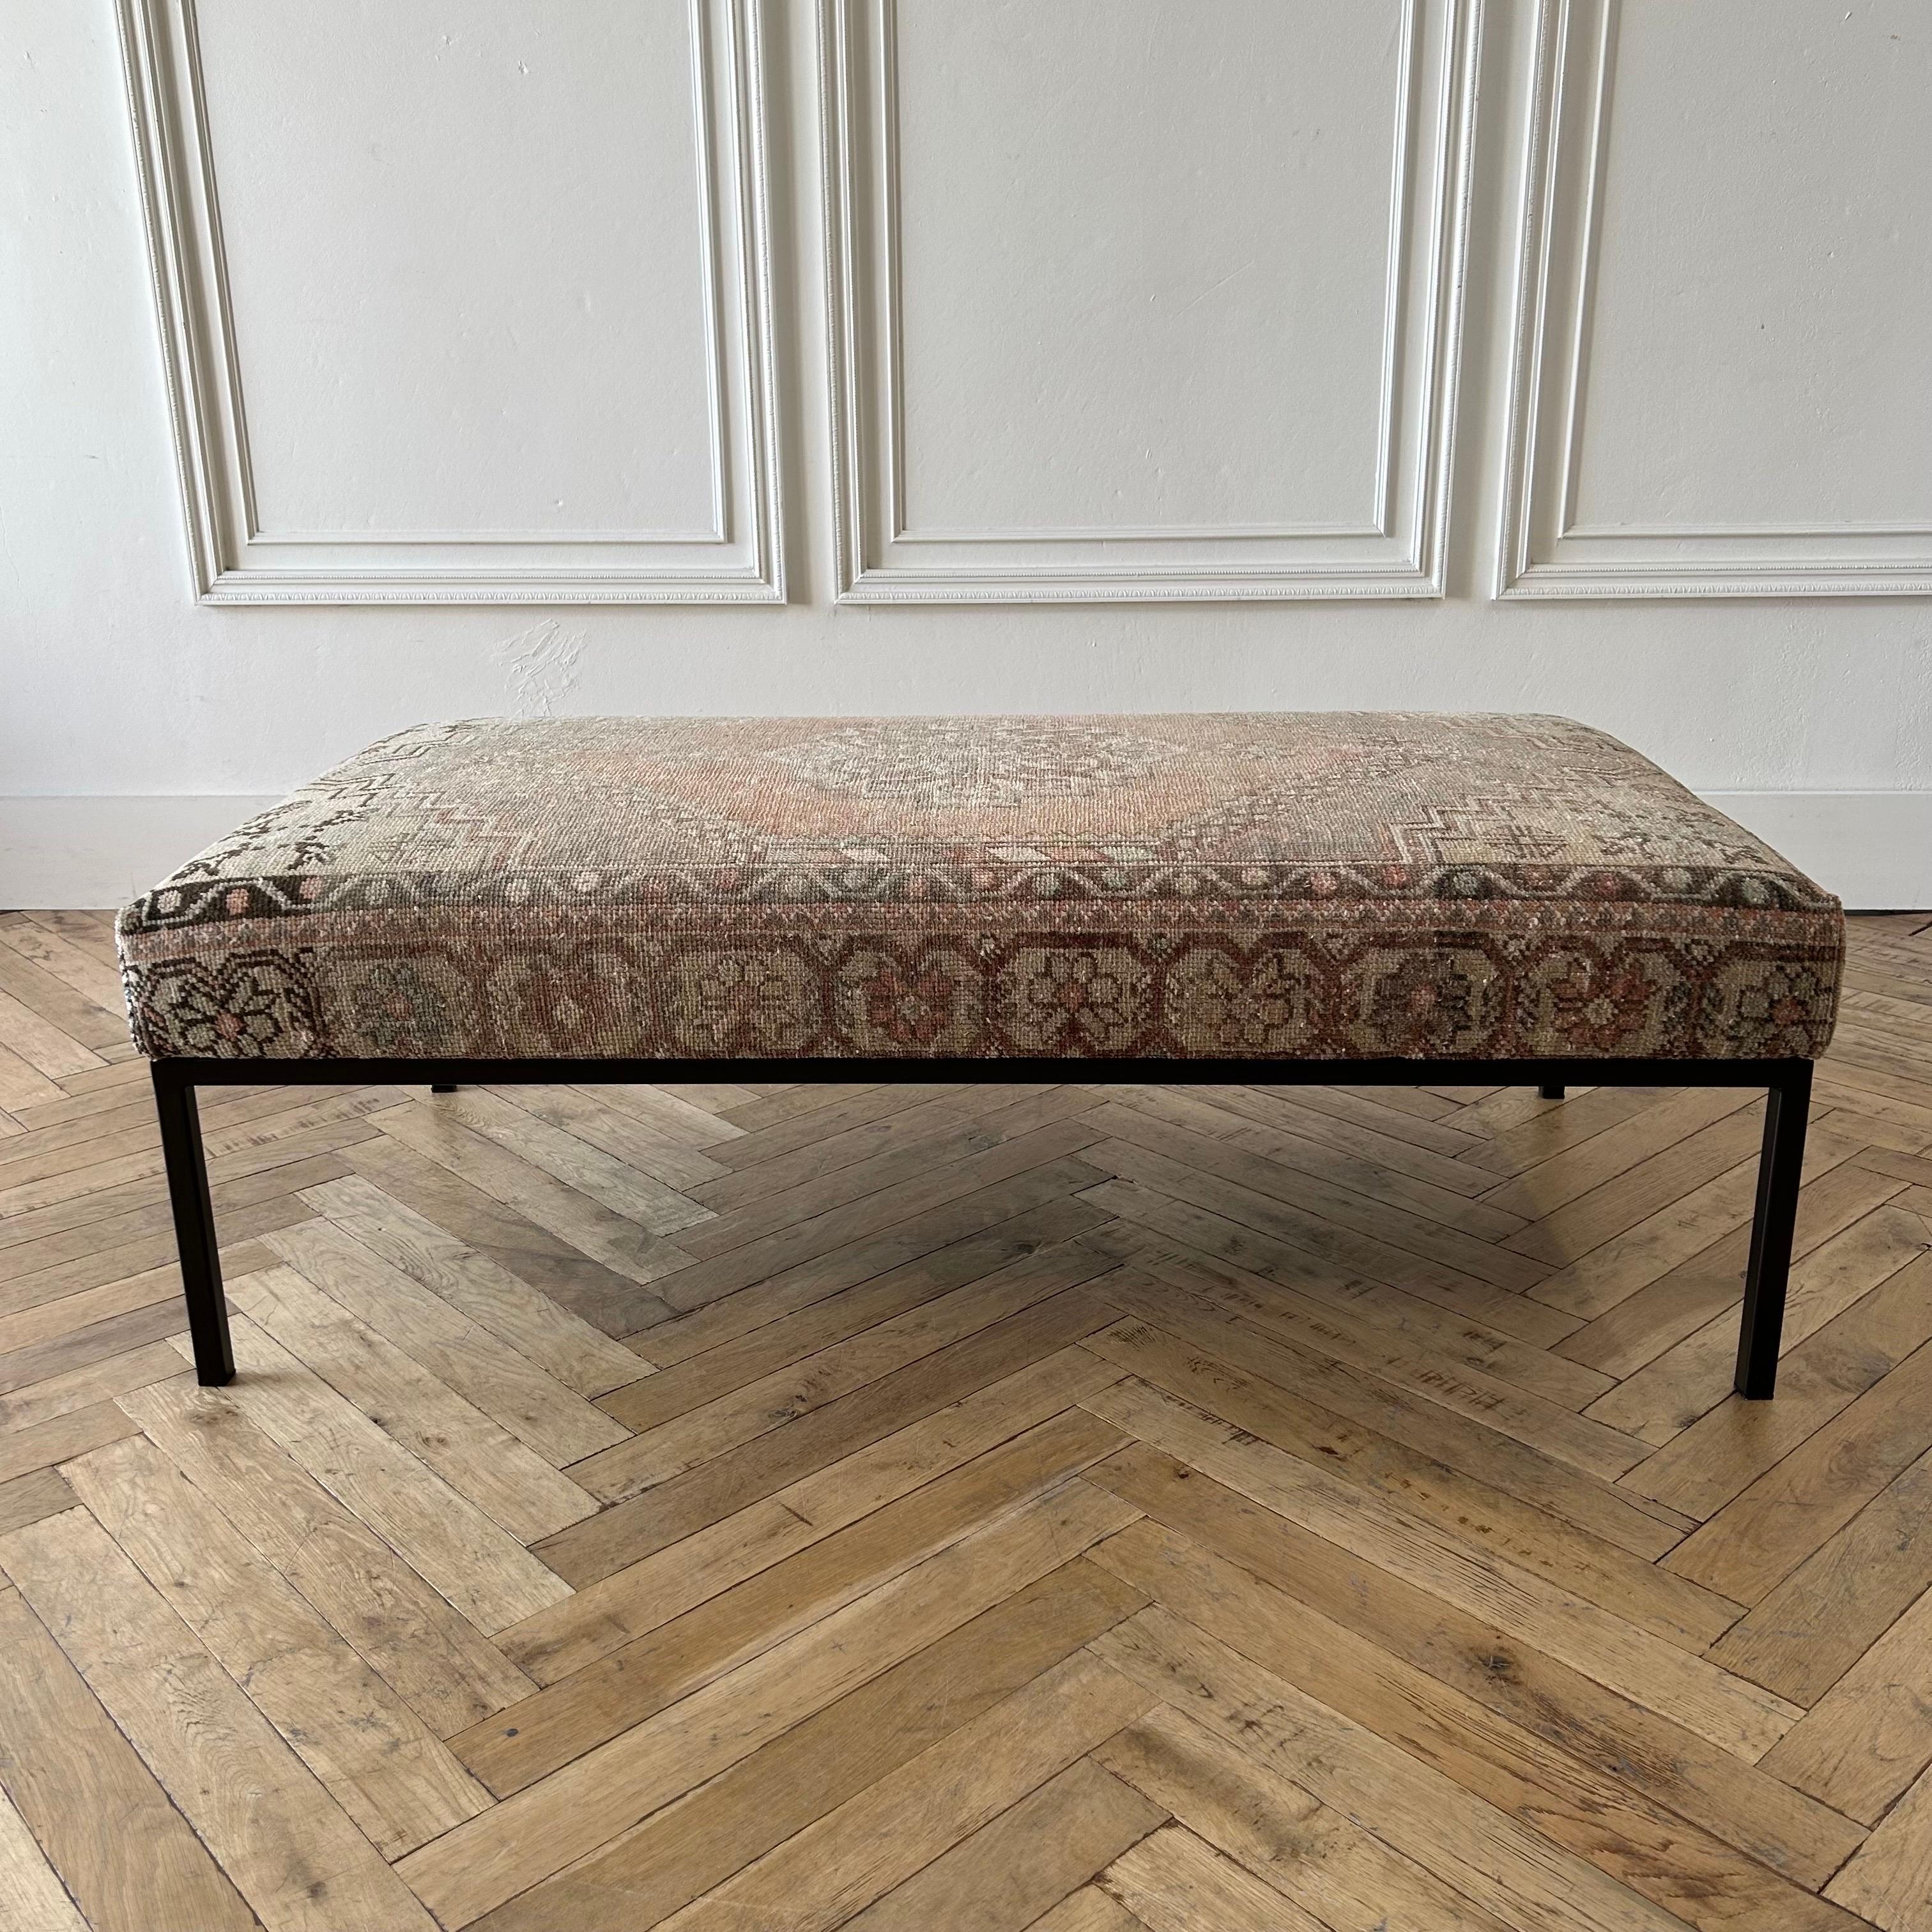 Custom made bench ottoman by Bloom Home Inc.

Size: 54”W x 28”D x 18”H

Custom made metal base, and powder coated in a dark iron bronze finish.
The upholstered top is from an antique or vintage turkish rug.

Color: brown / gray / natural /